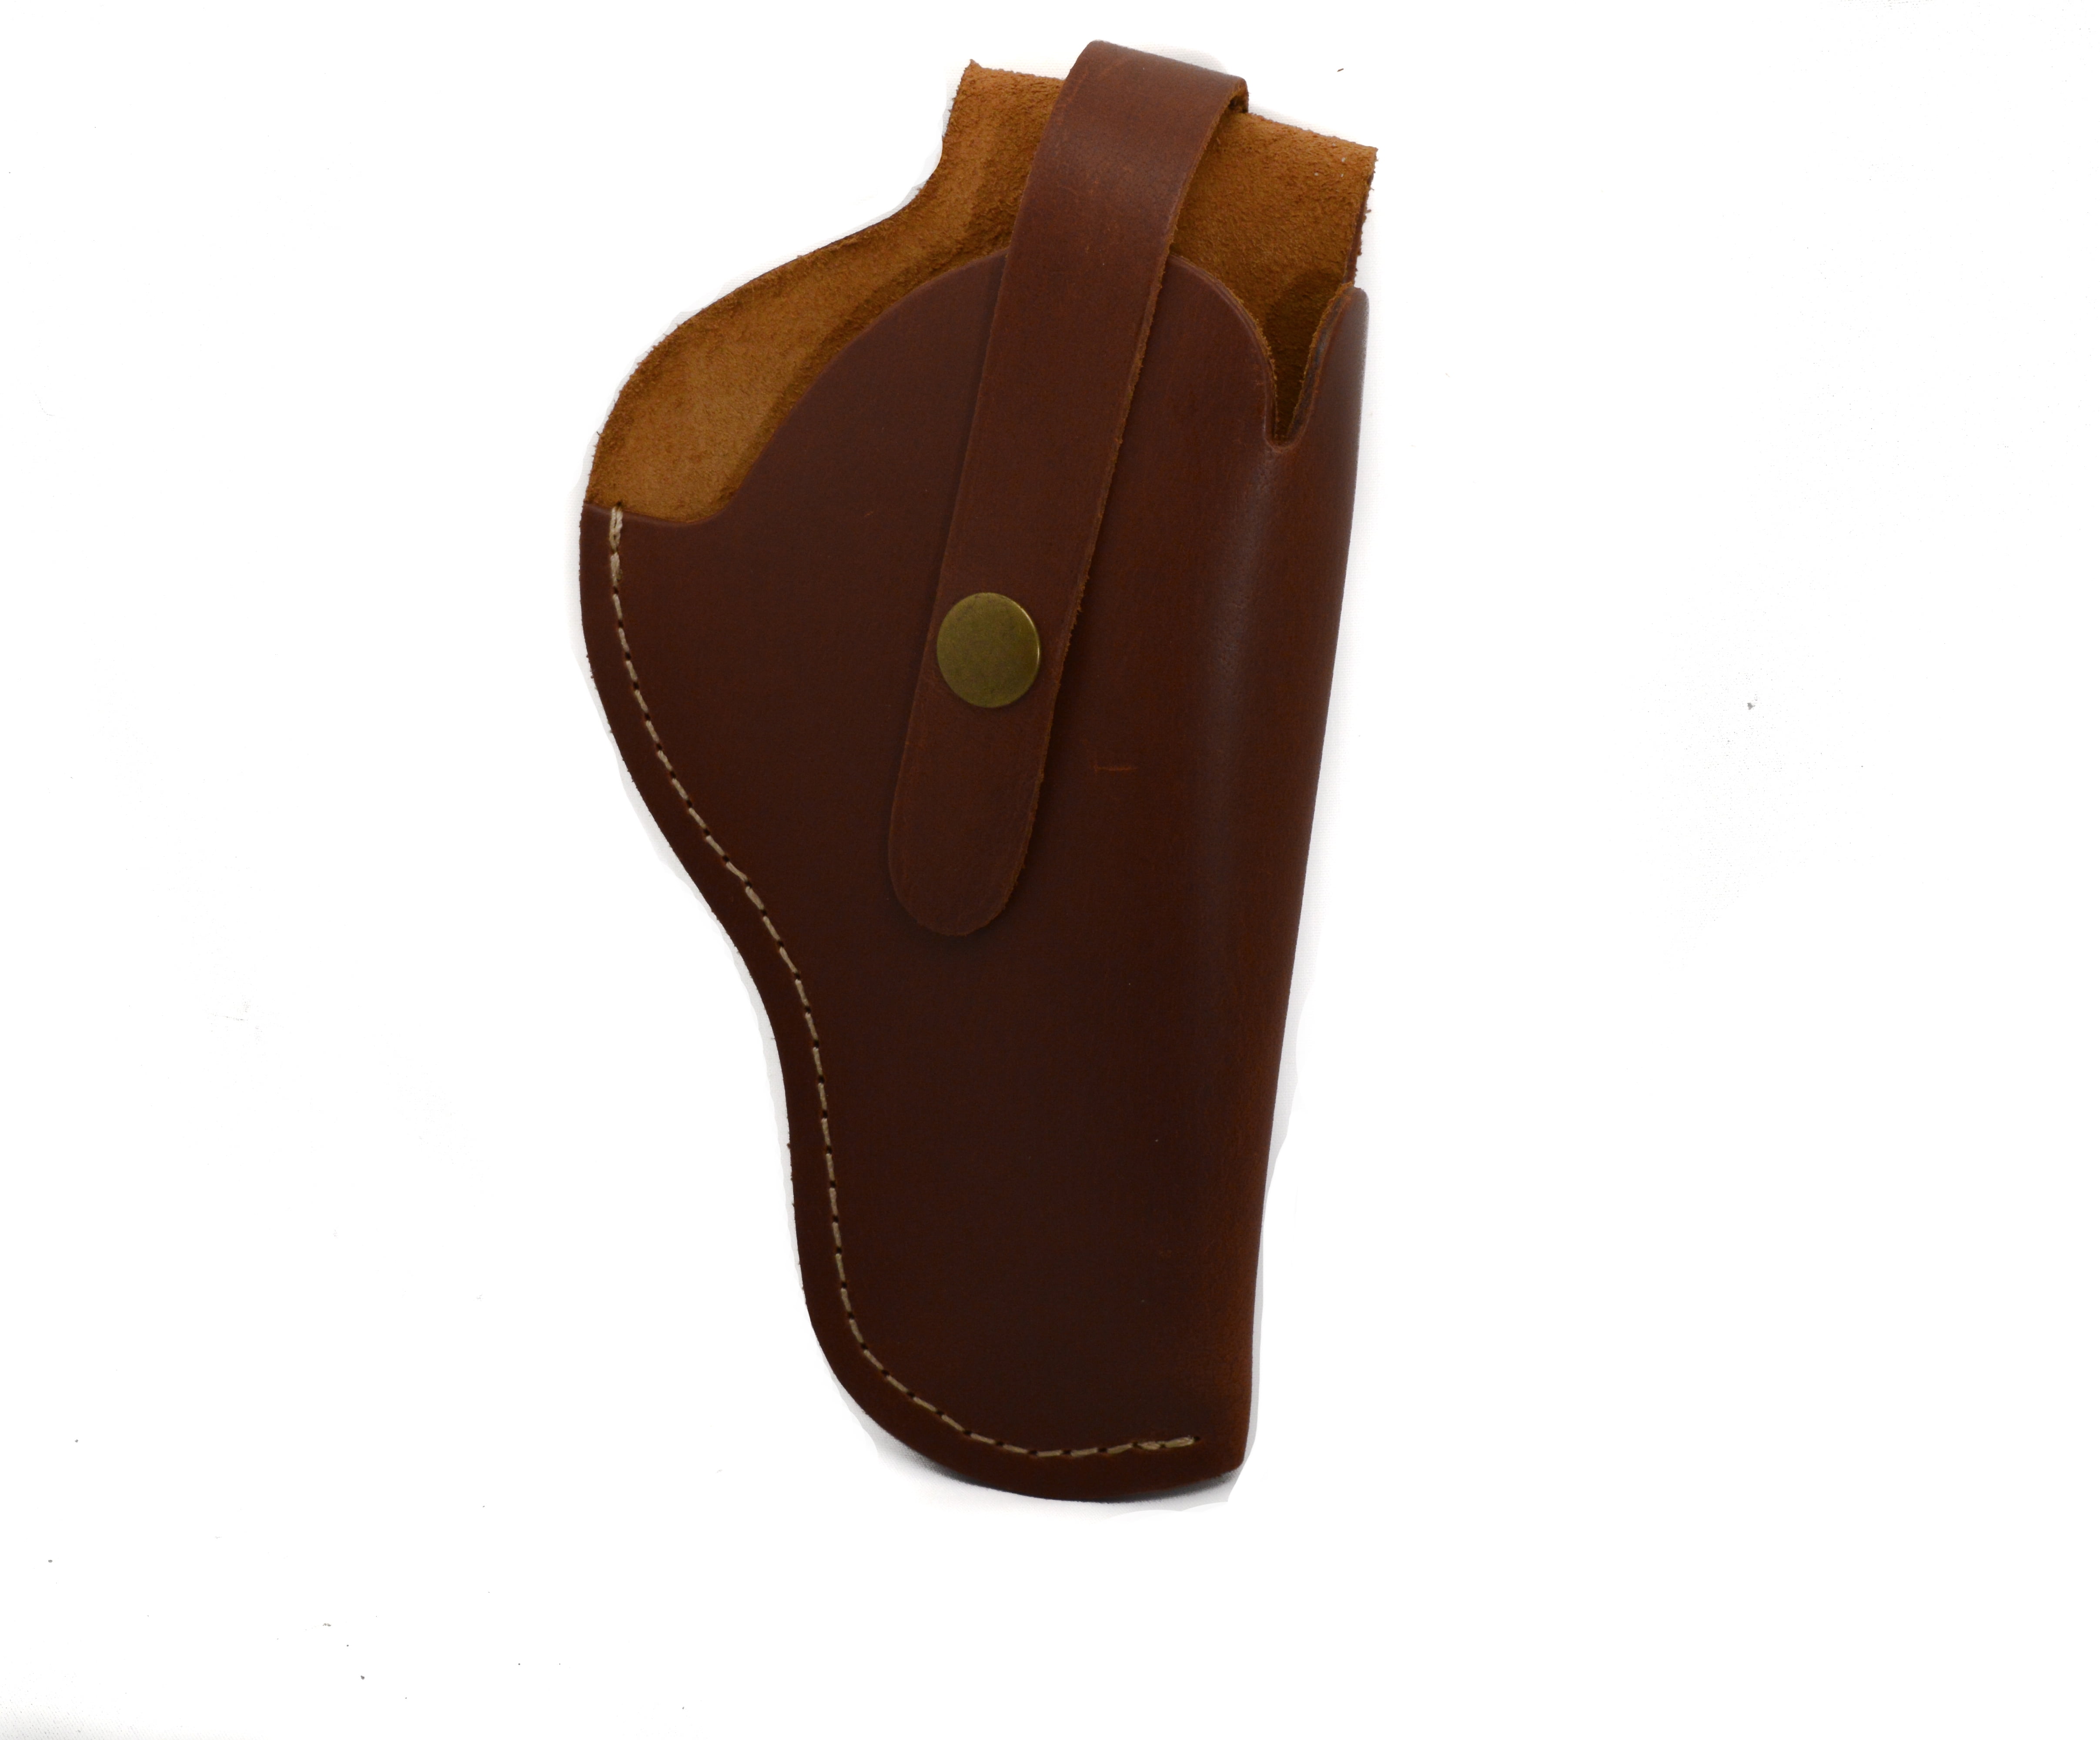 Saddle Mate Brown Leather Gun Holster 6 with Adjustable Retention Strap 